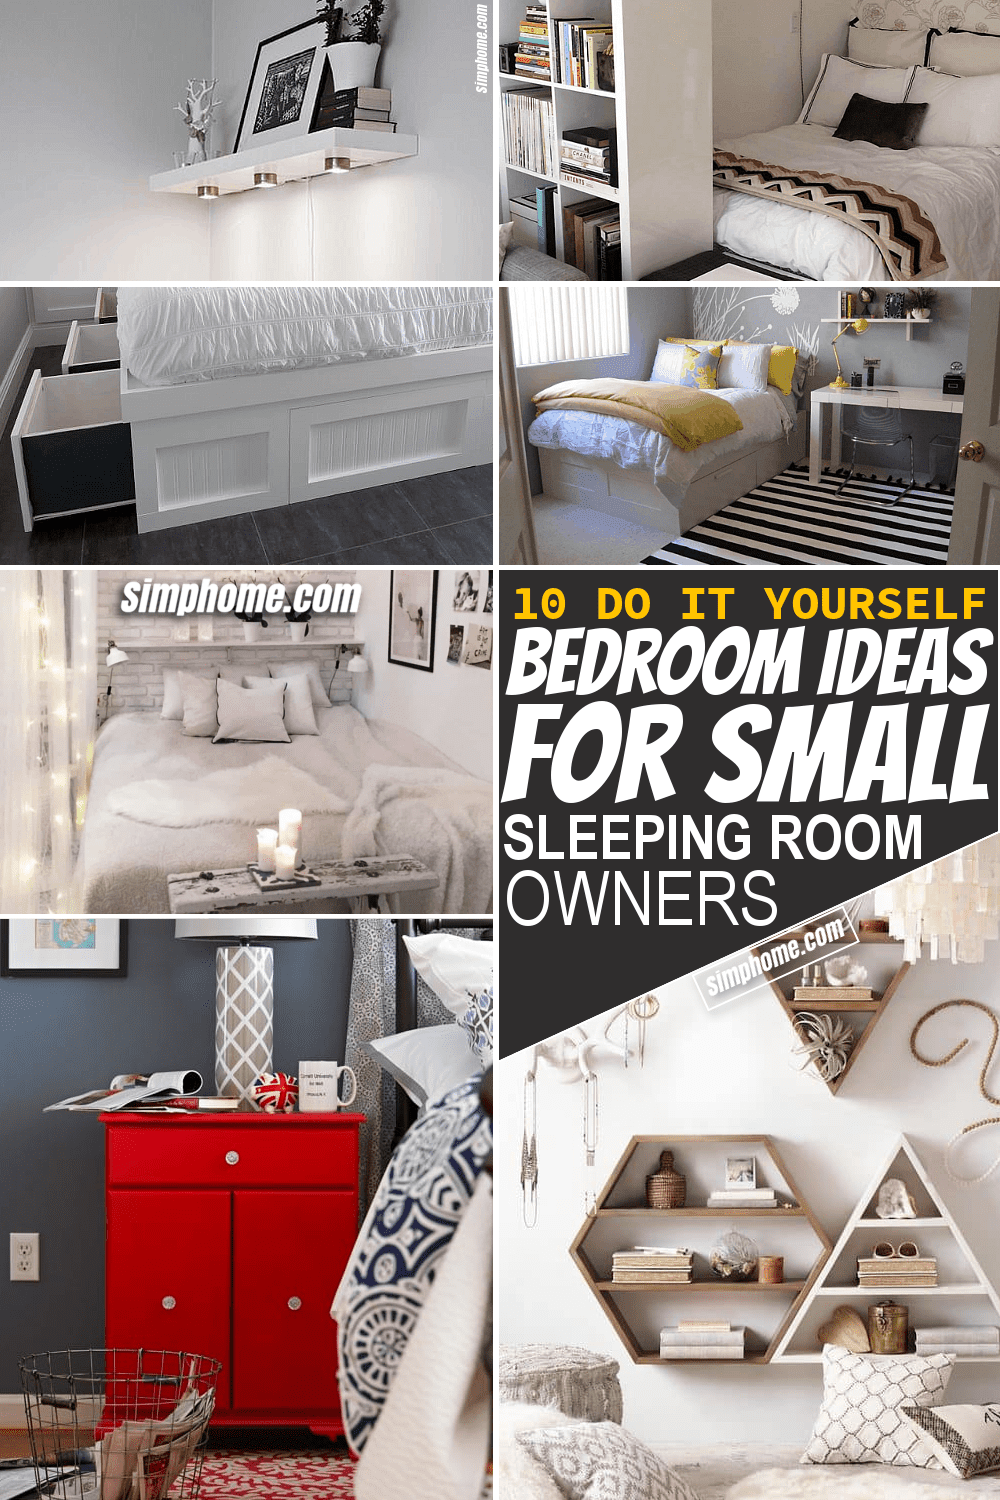 Simphome.com 10 Bedroom Ideas for Small Sleeping Room Owners Featured Pinterest Image